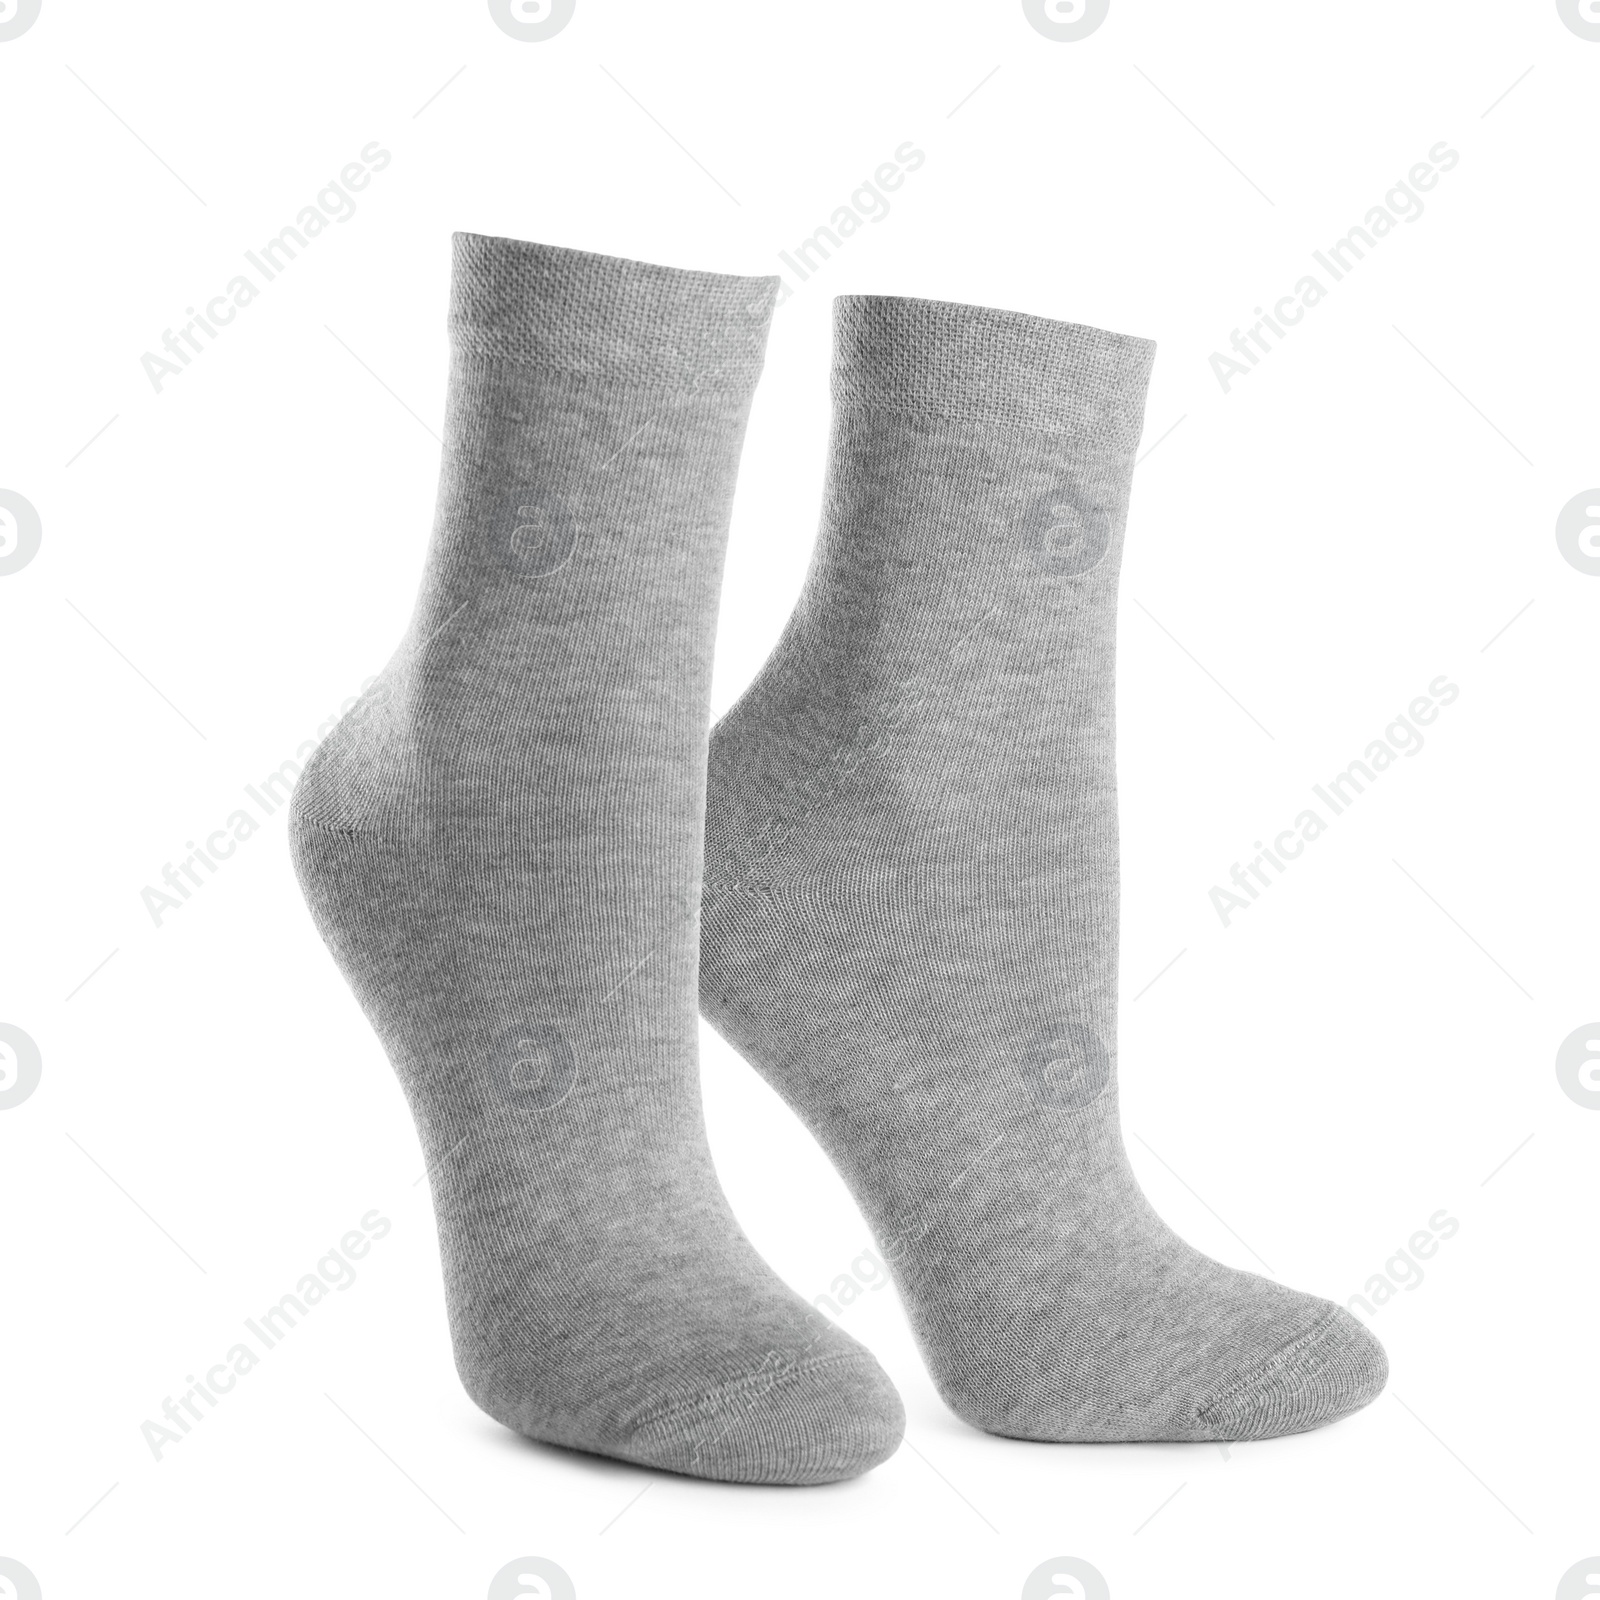 Image of Pair of light grey socks isolated on white